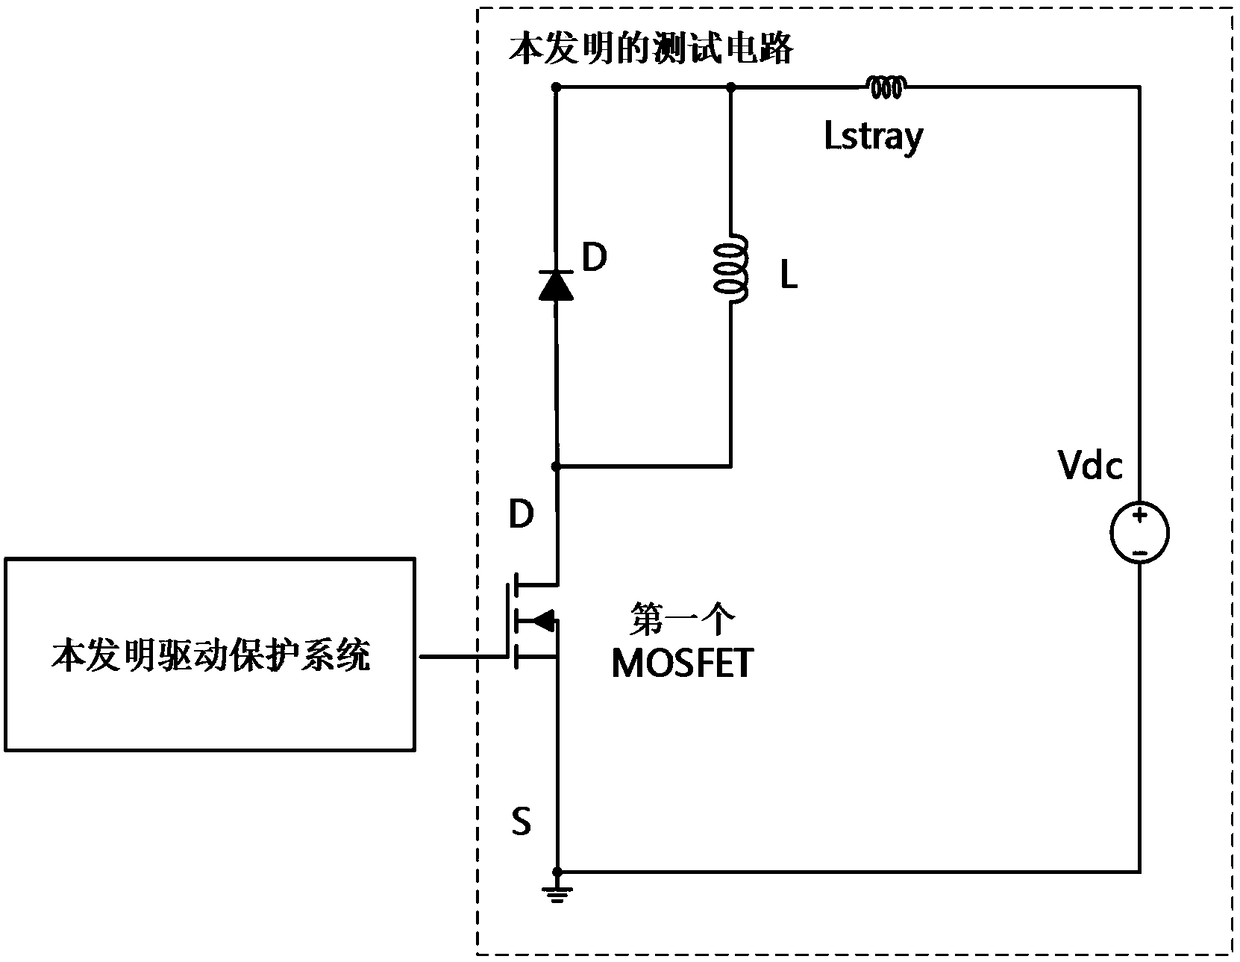 Overcurrent and overvoltage and undervoltage drive protection system based on sic MOSFET